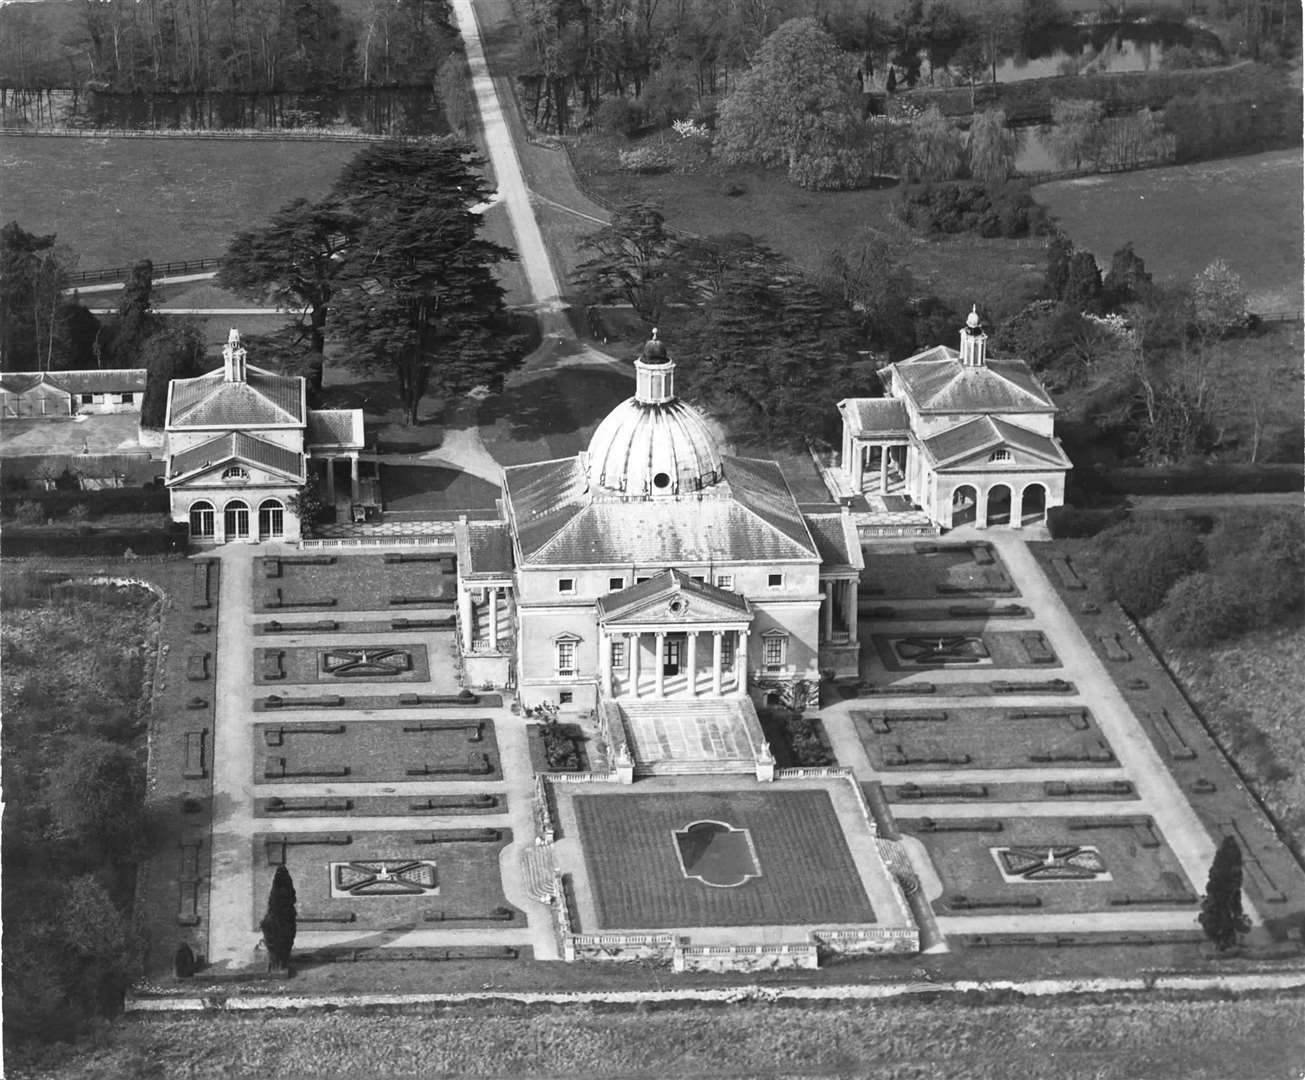 An aerial view of Mereworth Castle